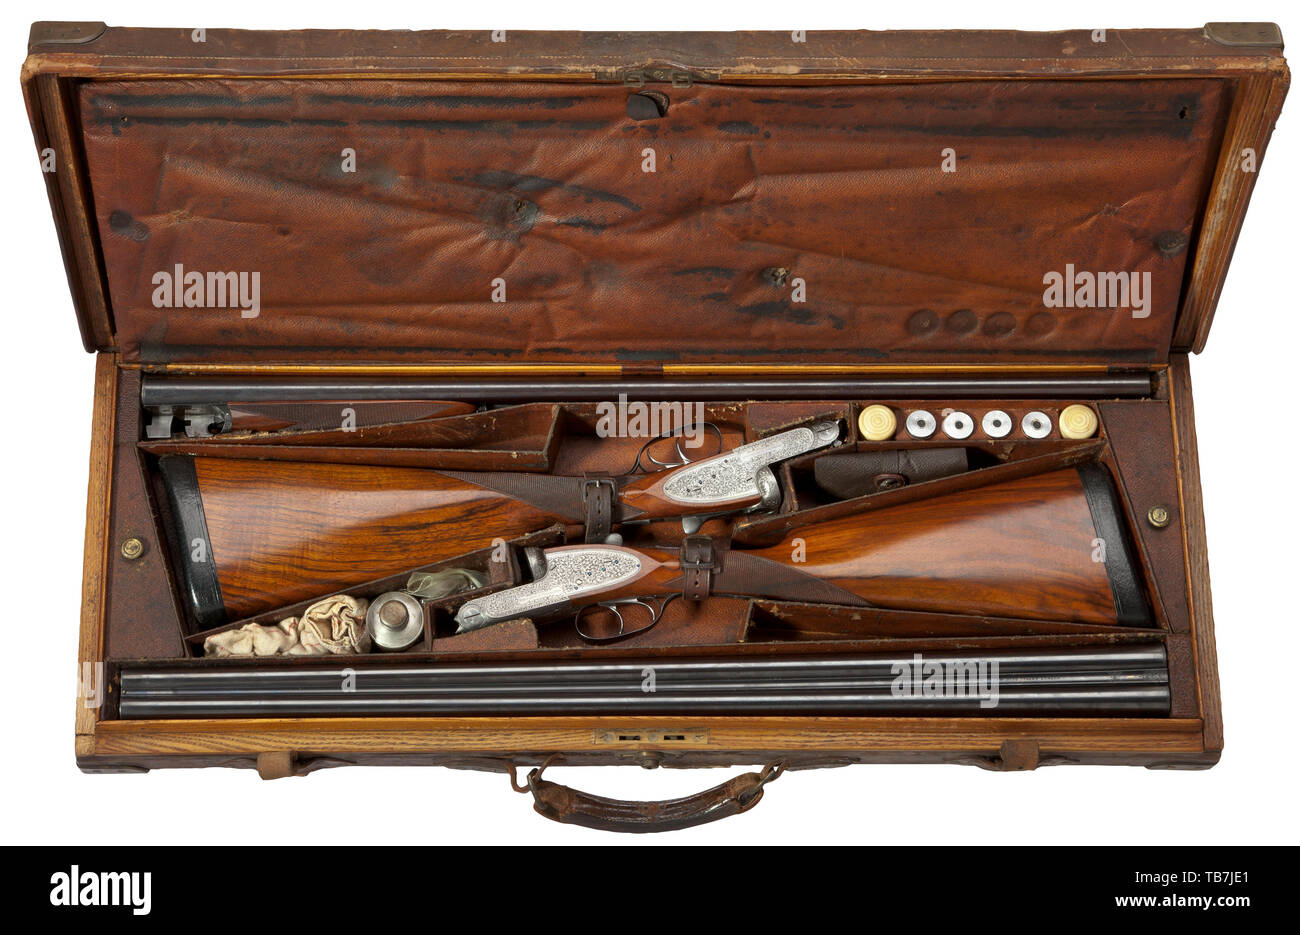 A pair of Holland & Holland side-by-side shotguns, in their case, Cal. 12/70, numbers 16049 and 16050. British proof mark and later German proof mark. Weapons on barrel and operating lever marked '1' (no. 16049) and '2' (no. 16050). Barrel length 76 cm each. Both circa 1/4-choke and cylinder bore. Barrels finished black. Manufacturer's data on barrel rib. Action with double barrel hook locking. Side locks. Double trigger. Safety slide on stock wrist. Action case in silver and shiny metallic, with vine engraving. Blued axles. Action case marked 'H, Additional-Rights-Clearance-Info-Not-Available Stock Photo